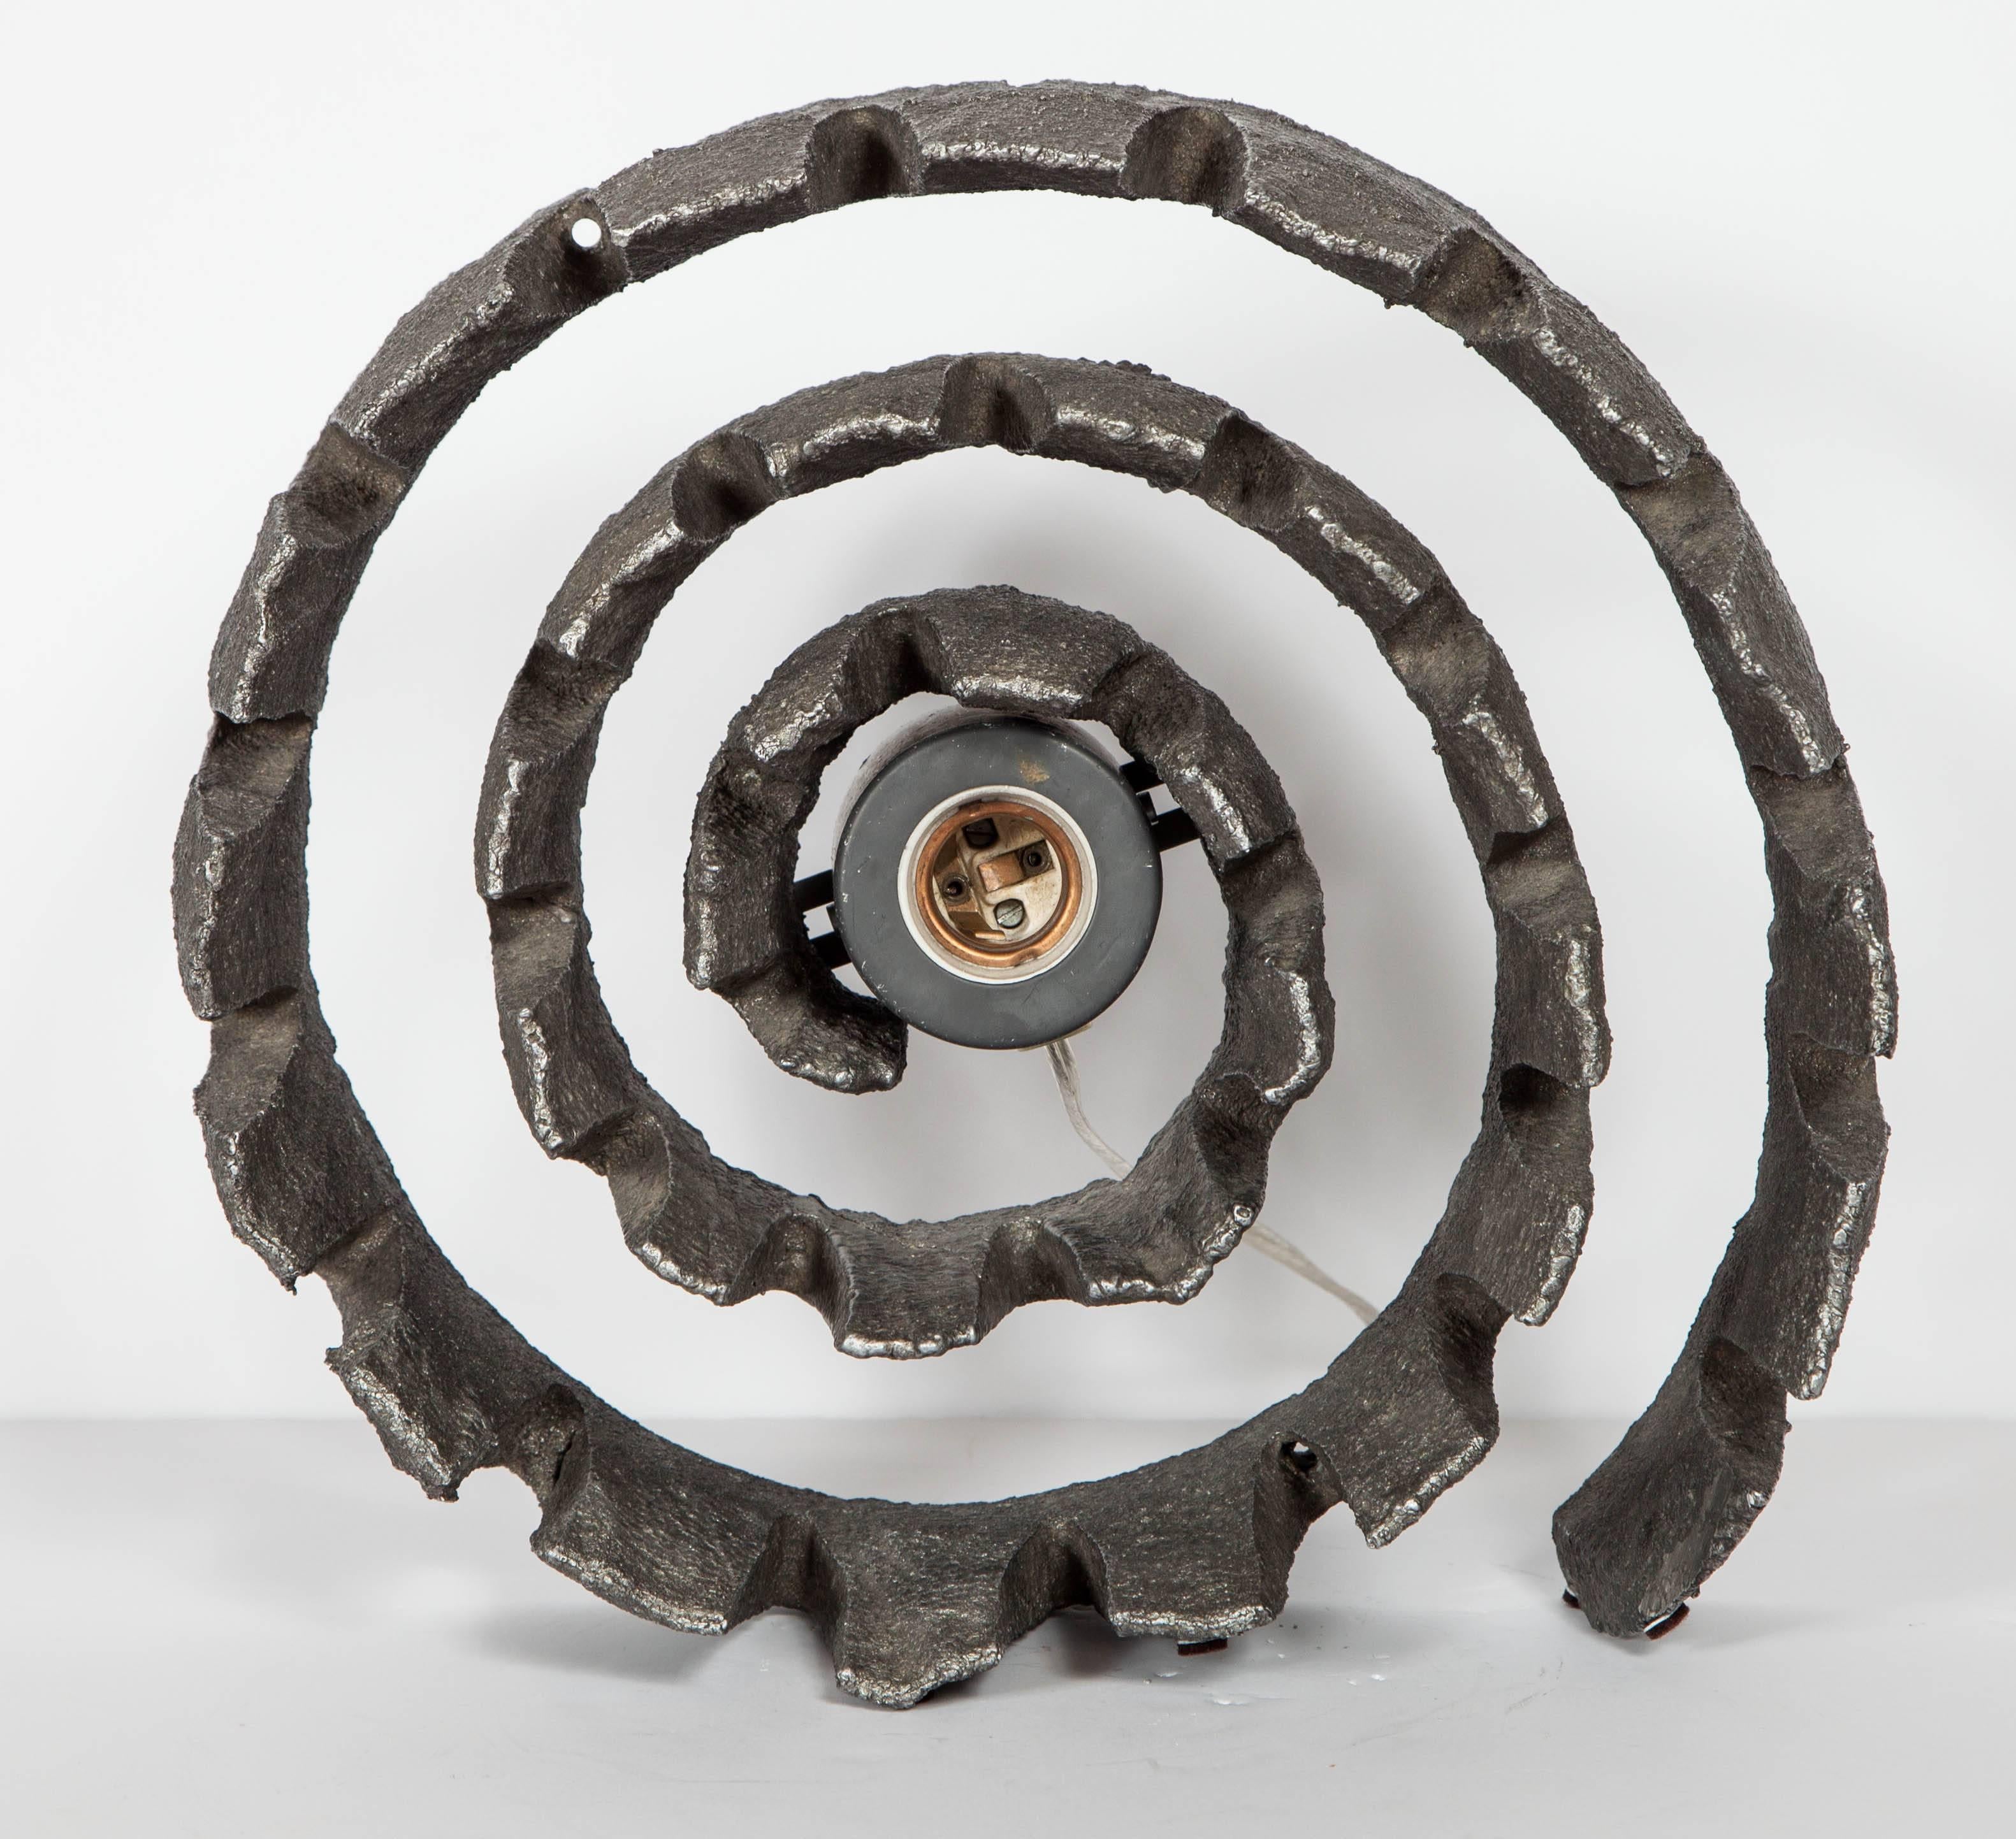 Mid-20th Century German Mid-Century Wheel Sculpture and Lamp with Brutalist Design